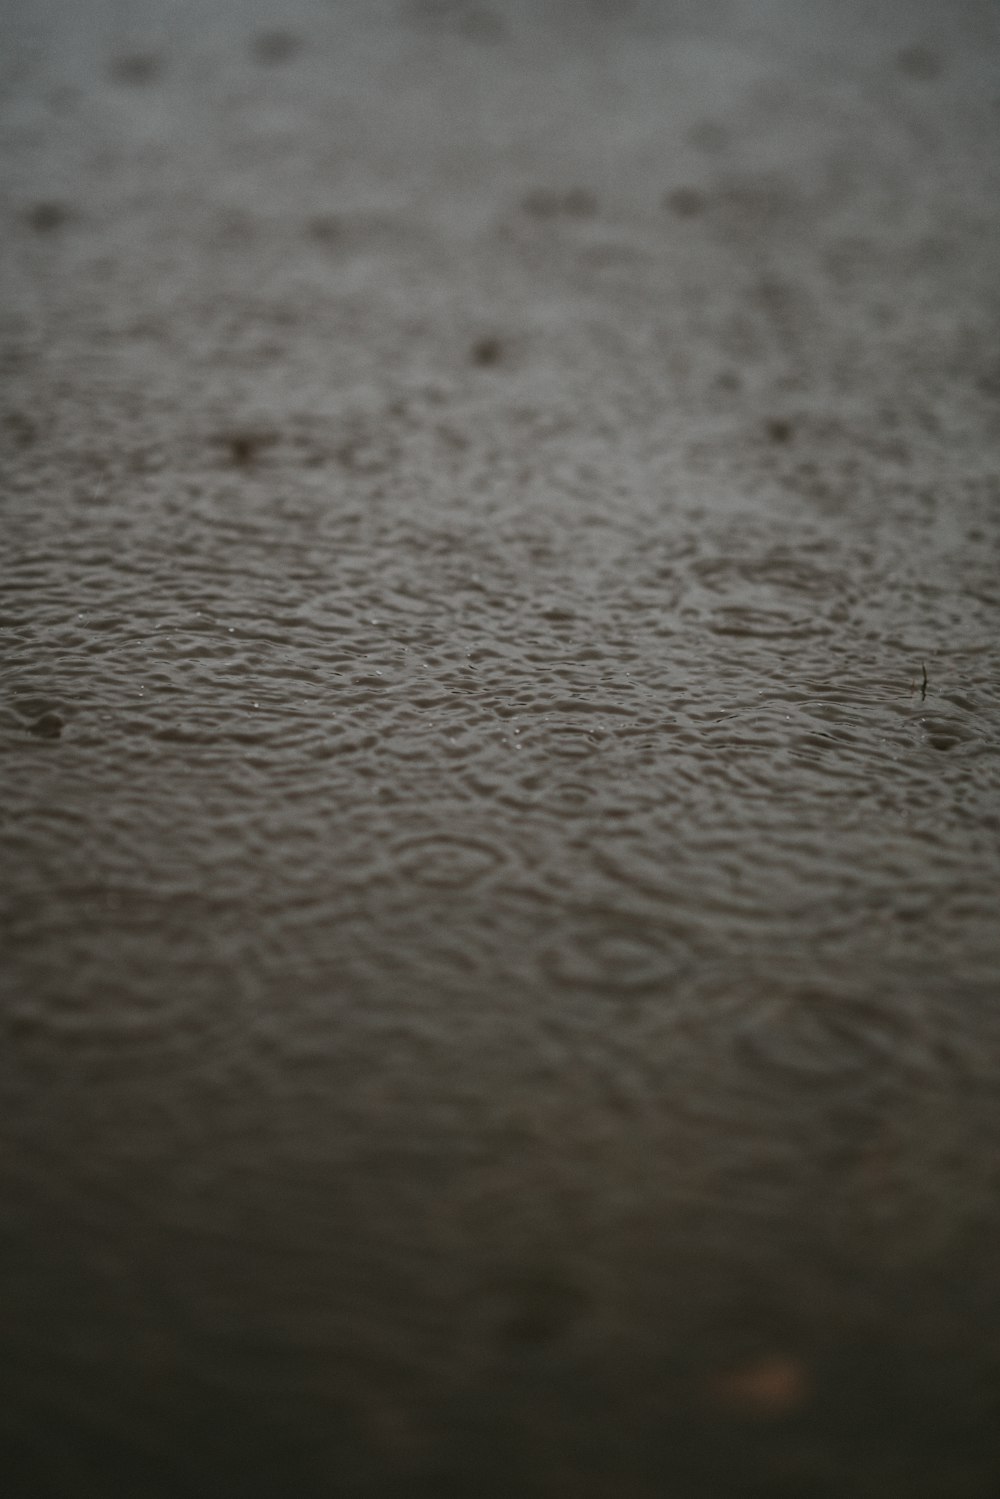 a black and white photo of a wet surface